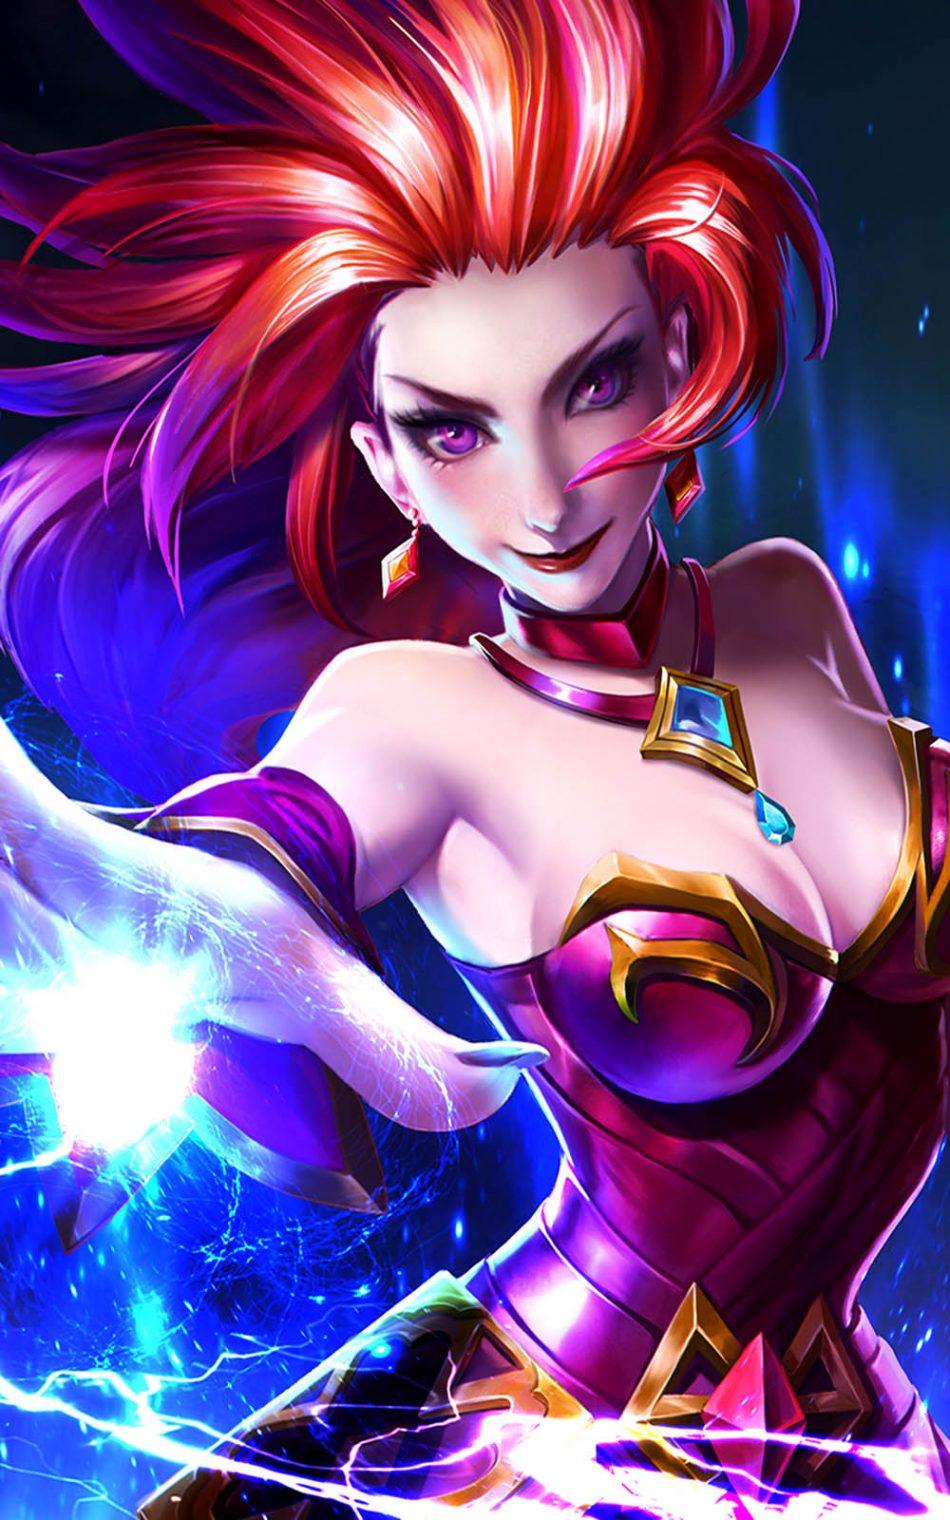 Download Flame Red Lips Eudora Mobile Legends Free Pure 4K Ultra HD